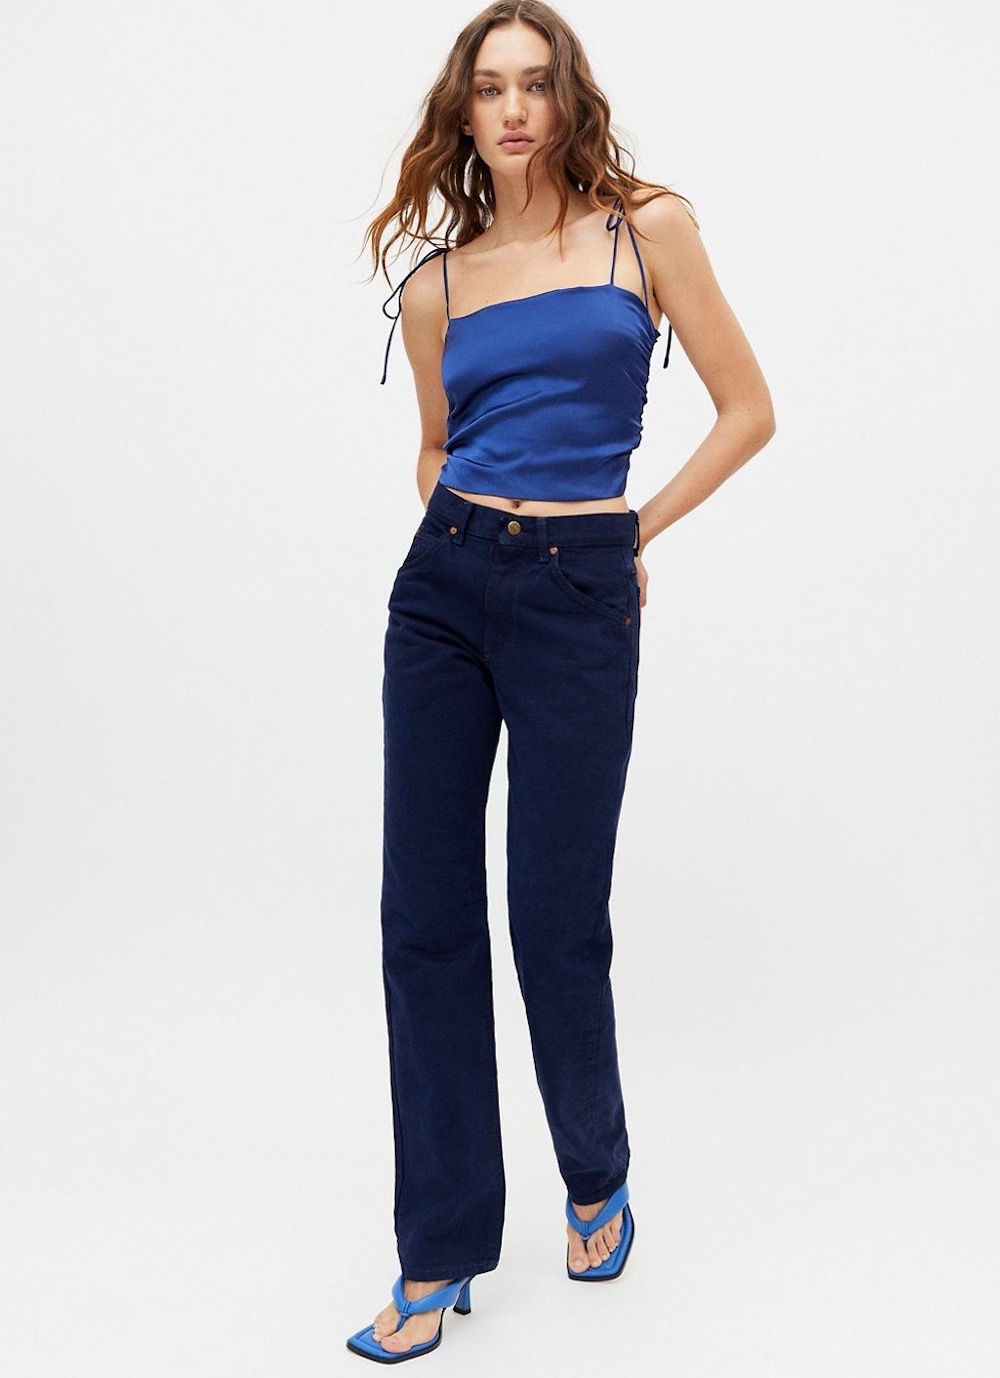 Fall 2021 Denim Trends to Have on Your Radar - theFashionSpot